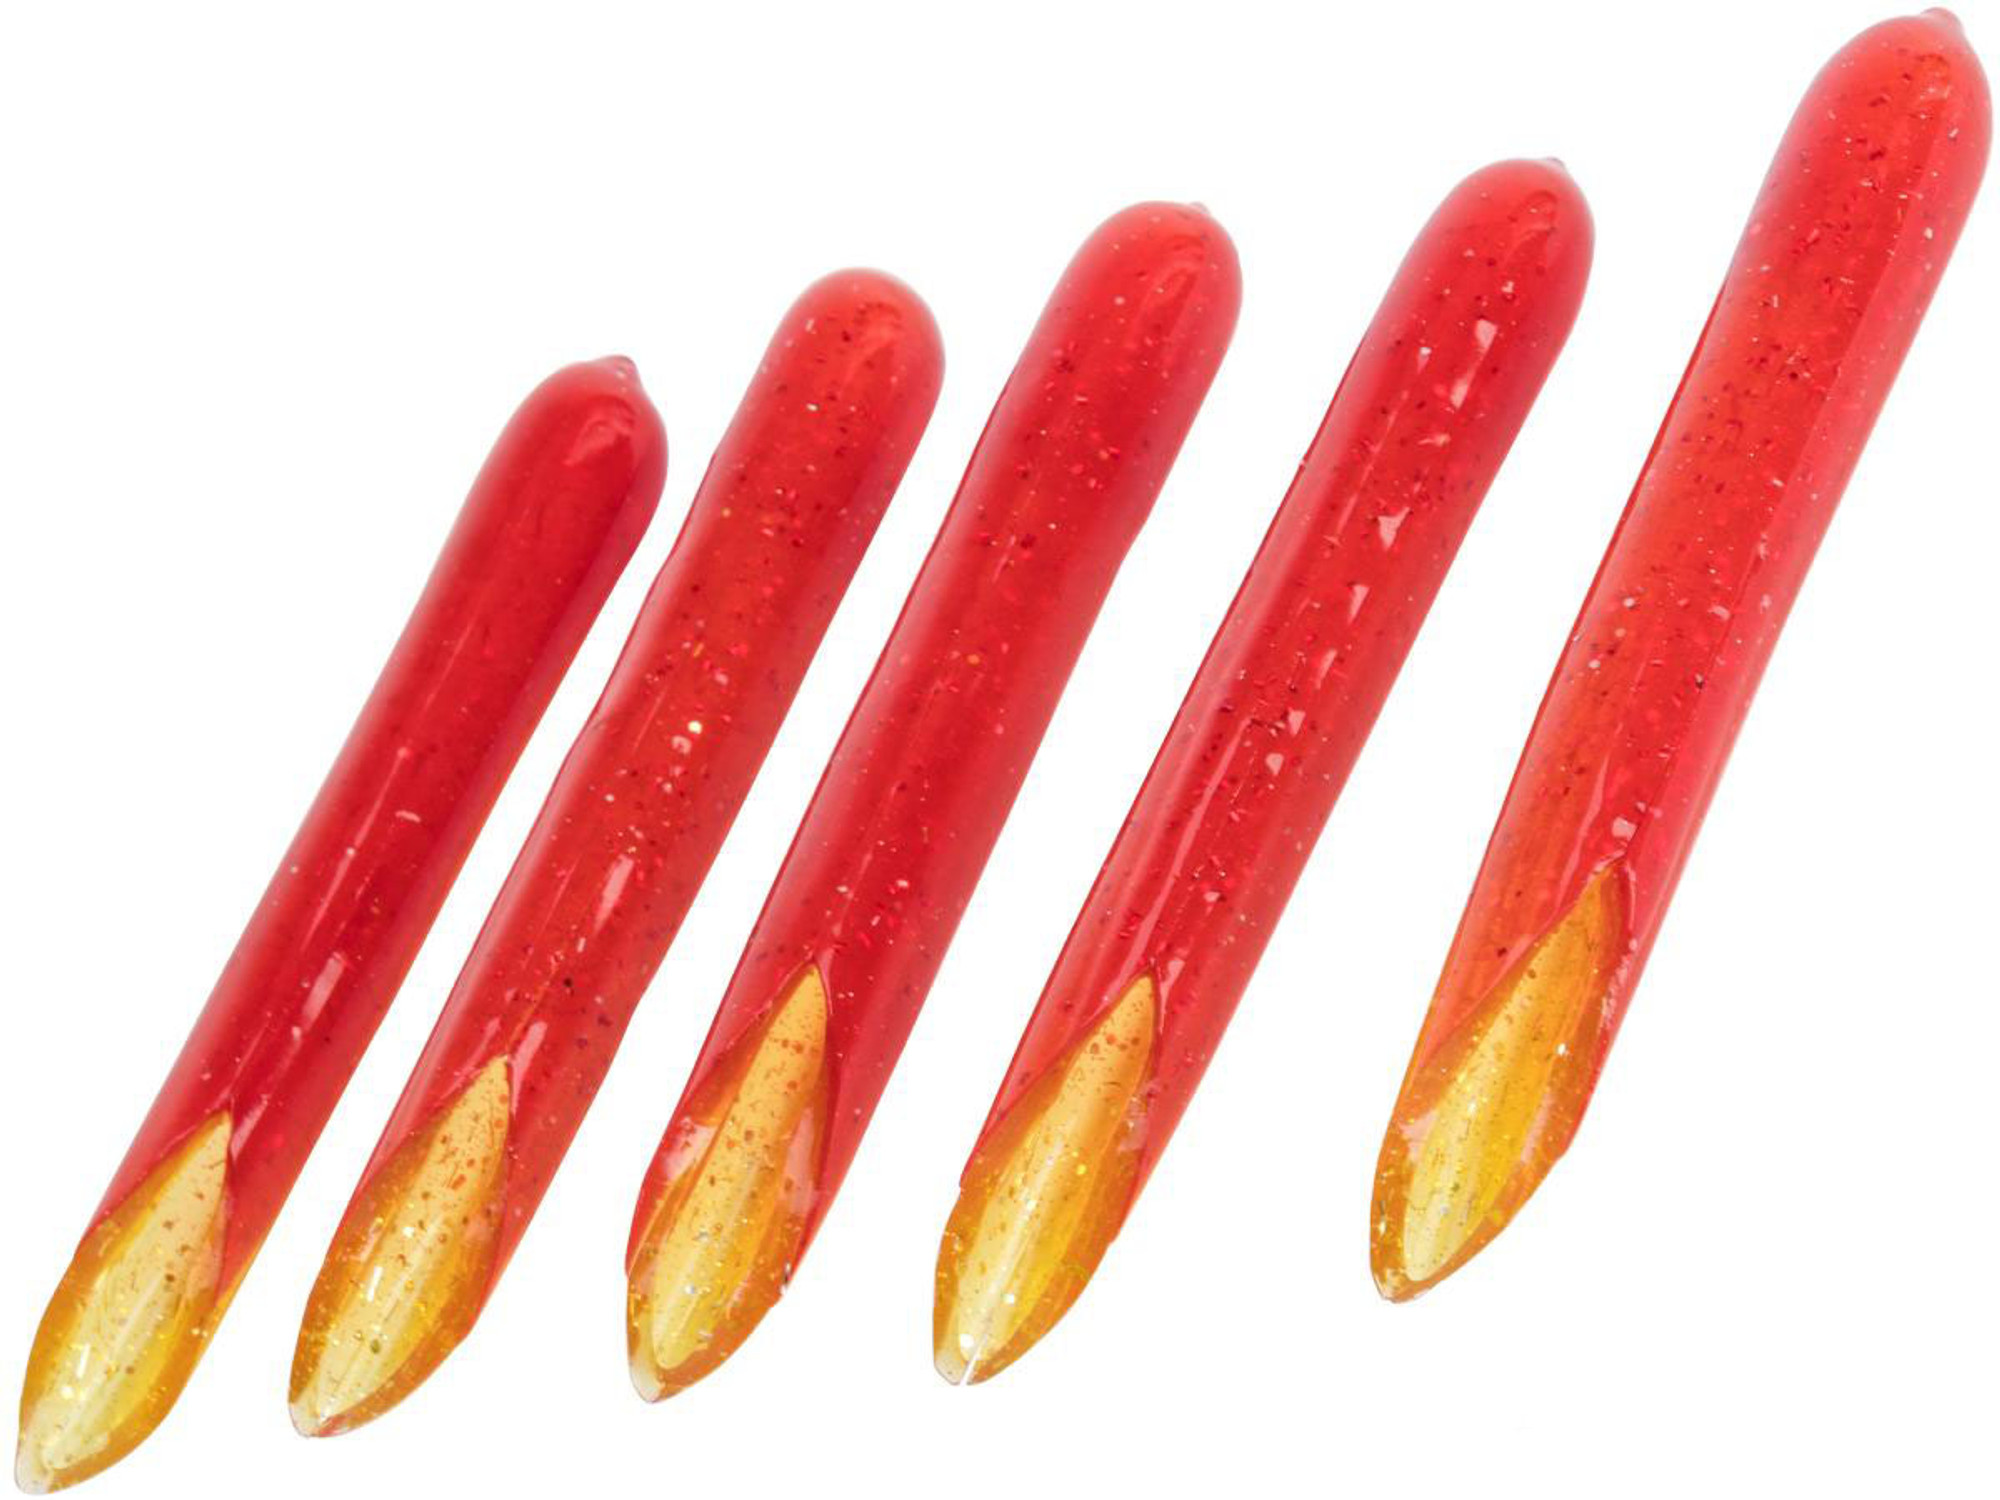 Hook Up Baits Hand Crafted Replacement Bodies for Jigs (Color: Red Crab / Big Game)